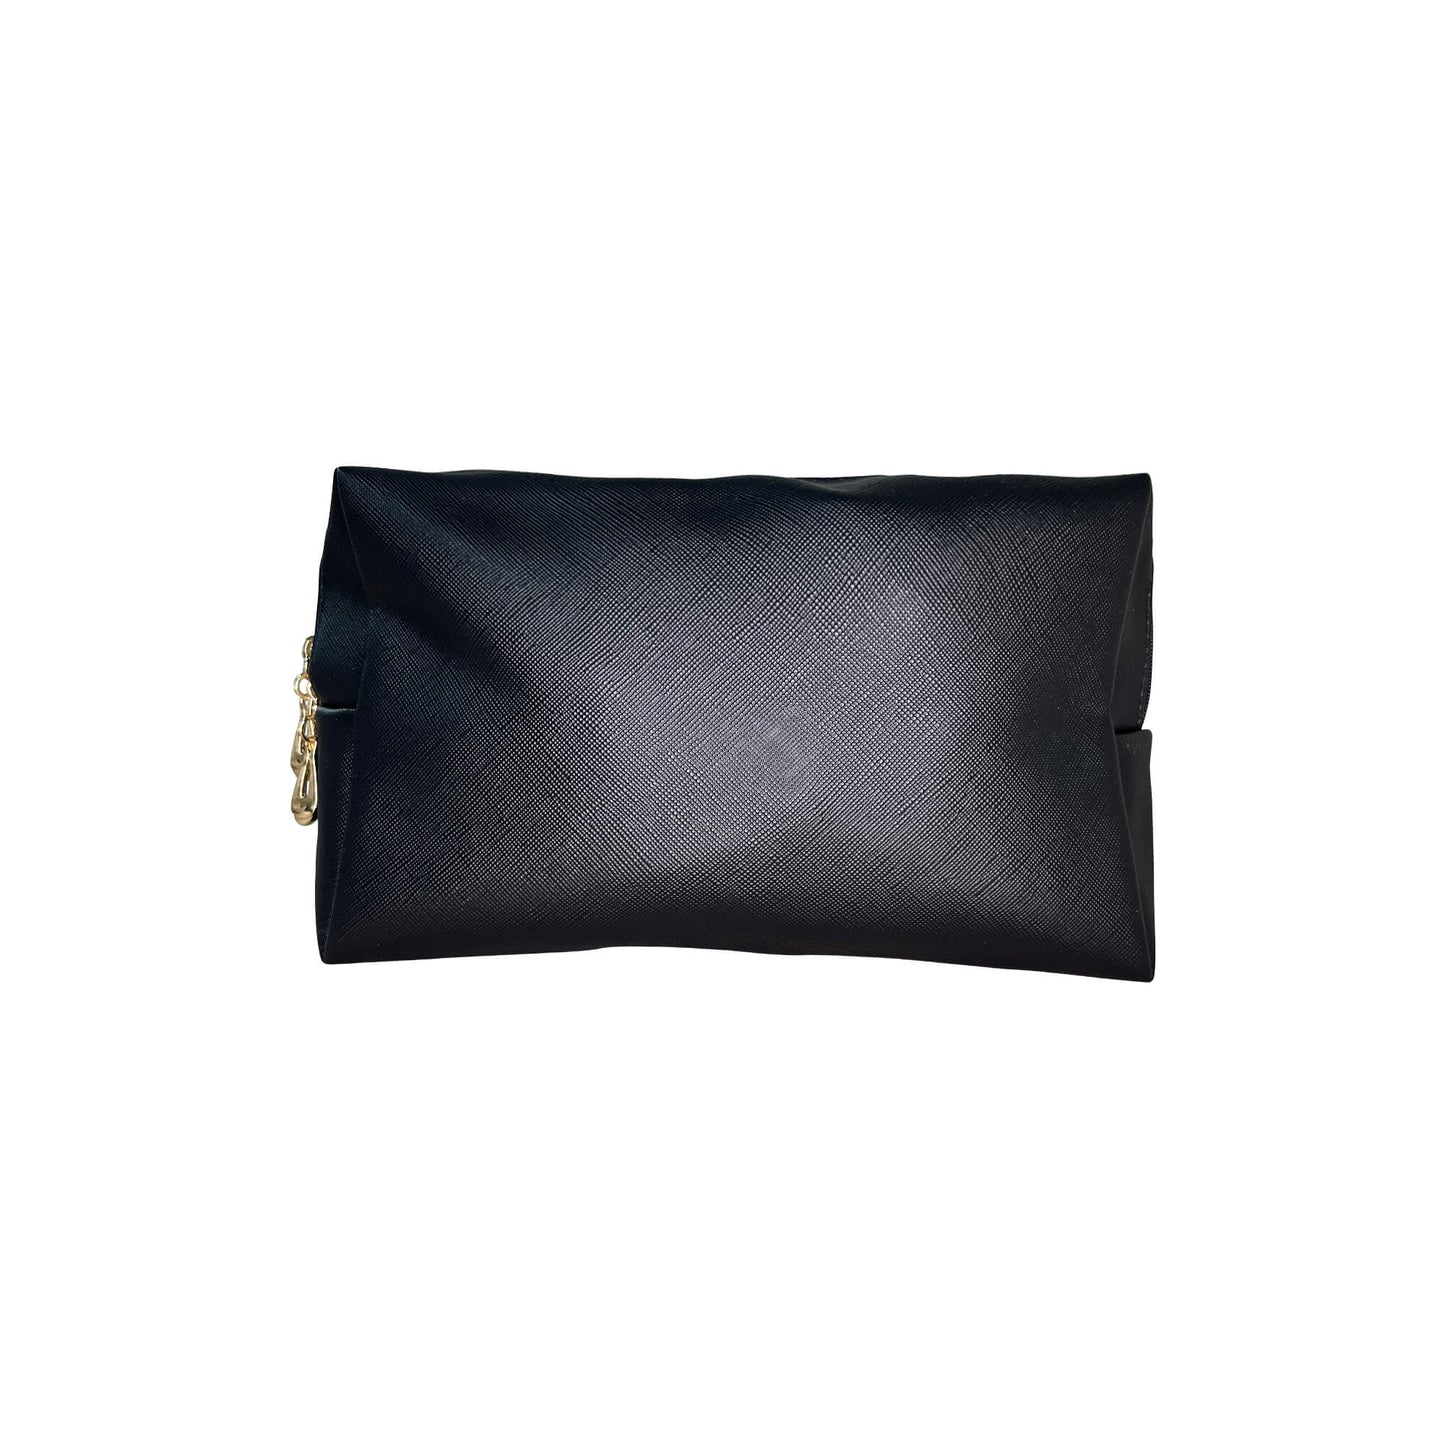 Need a bigger makeup bag for extended days and traveling? The Cruisin Organics Everywhere Makeup Bag is ideal. Take it with you on all your trips, featuring a versatile and compact structure. Its waterproof outer layer and sleek black appearance make it perfect for days spent by the pool.